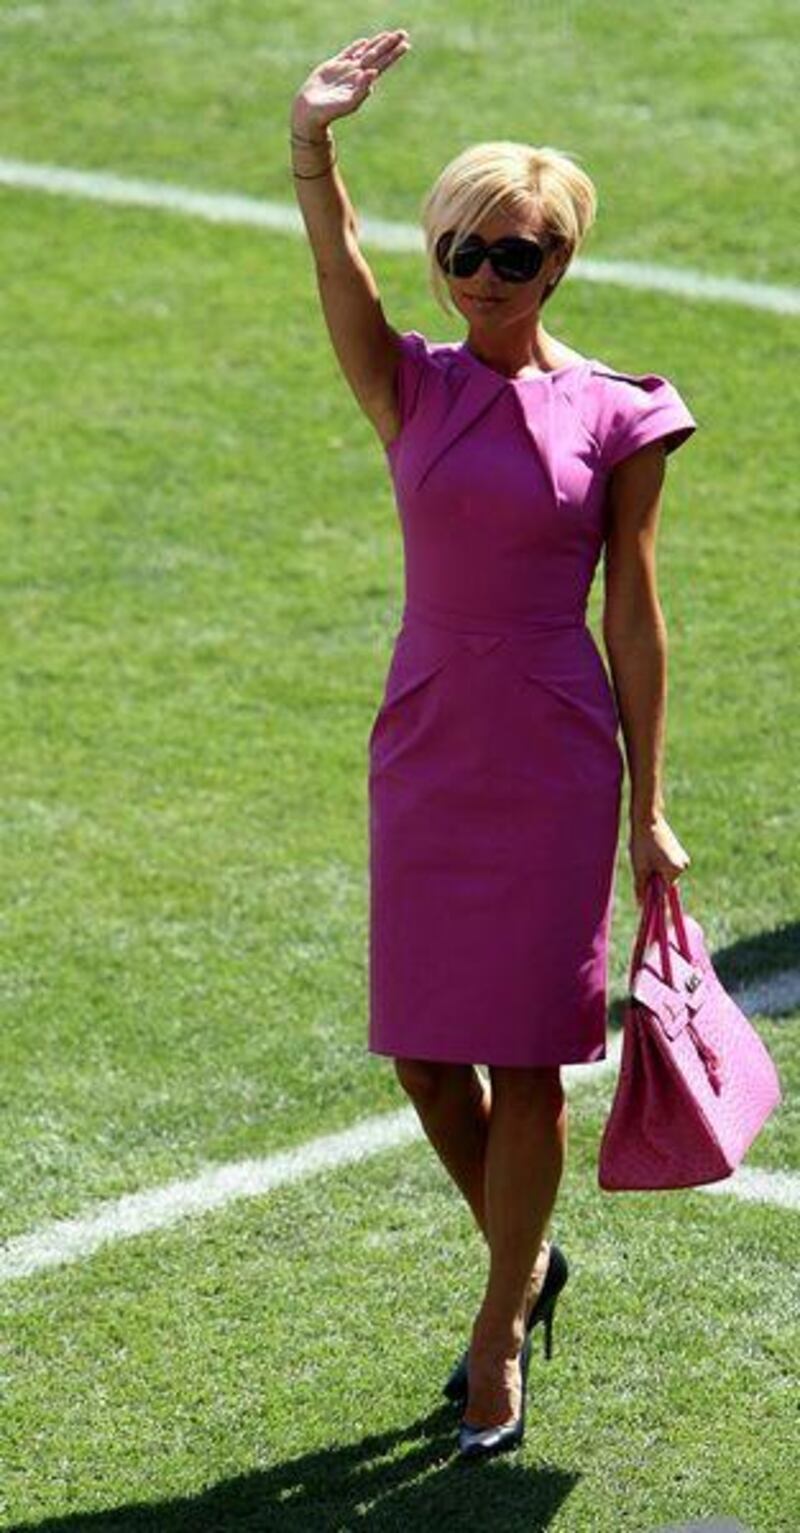 It is debatable whether the presence of WAGs, like Victoria Beckham, was detrimental to England's performance in the 2006 World Cup.